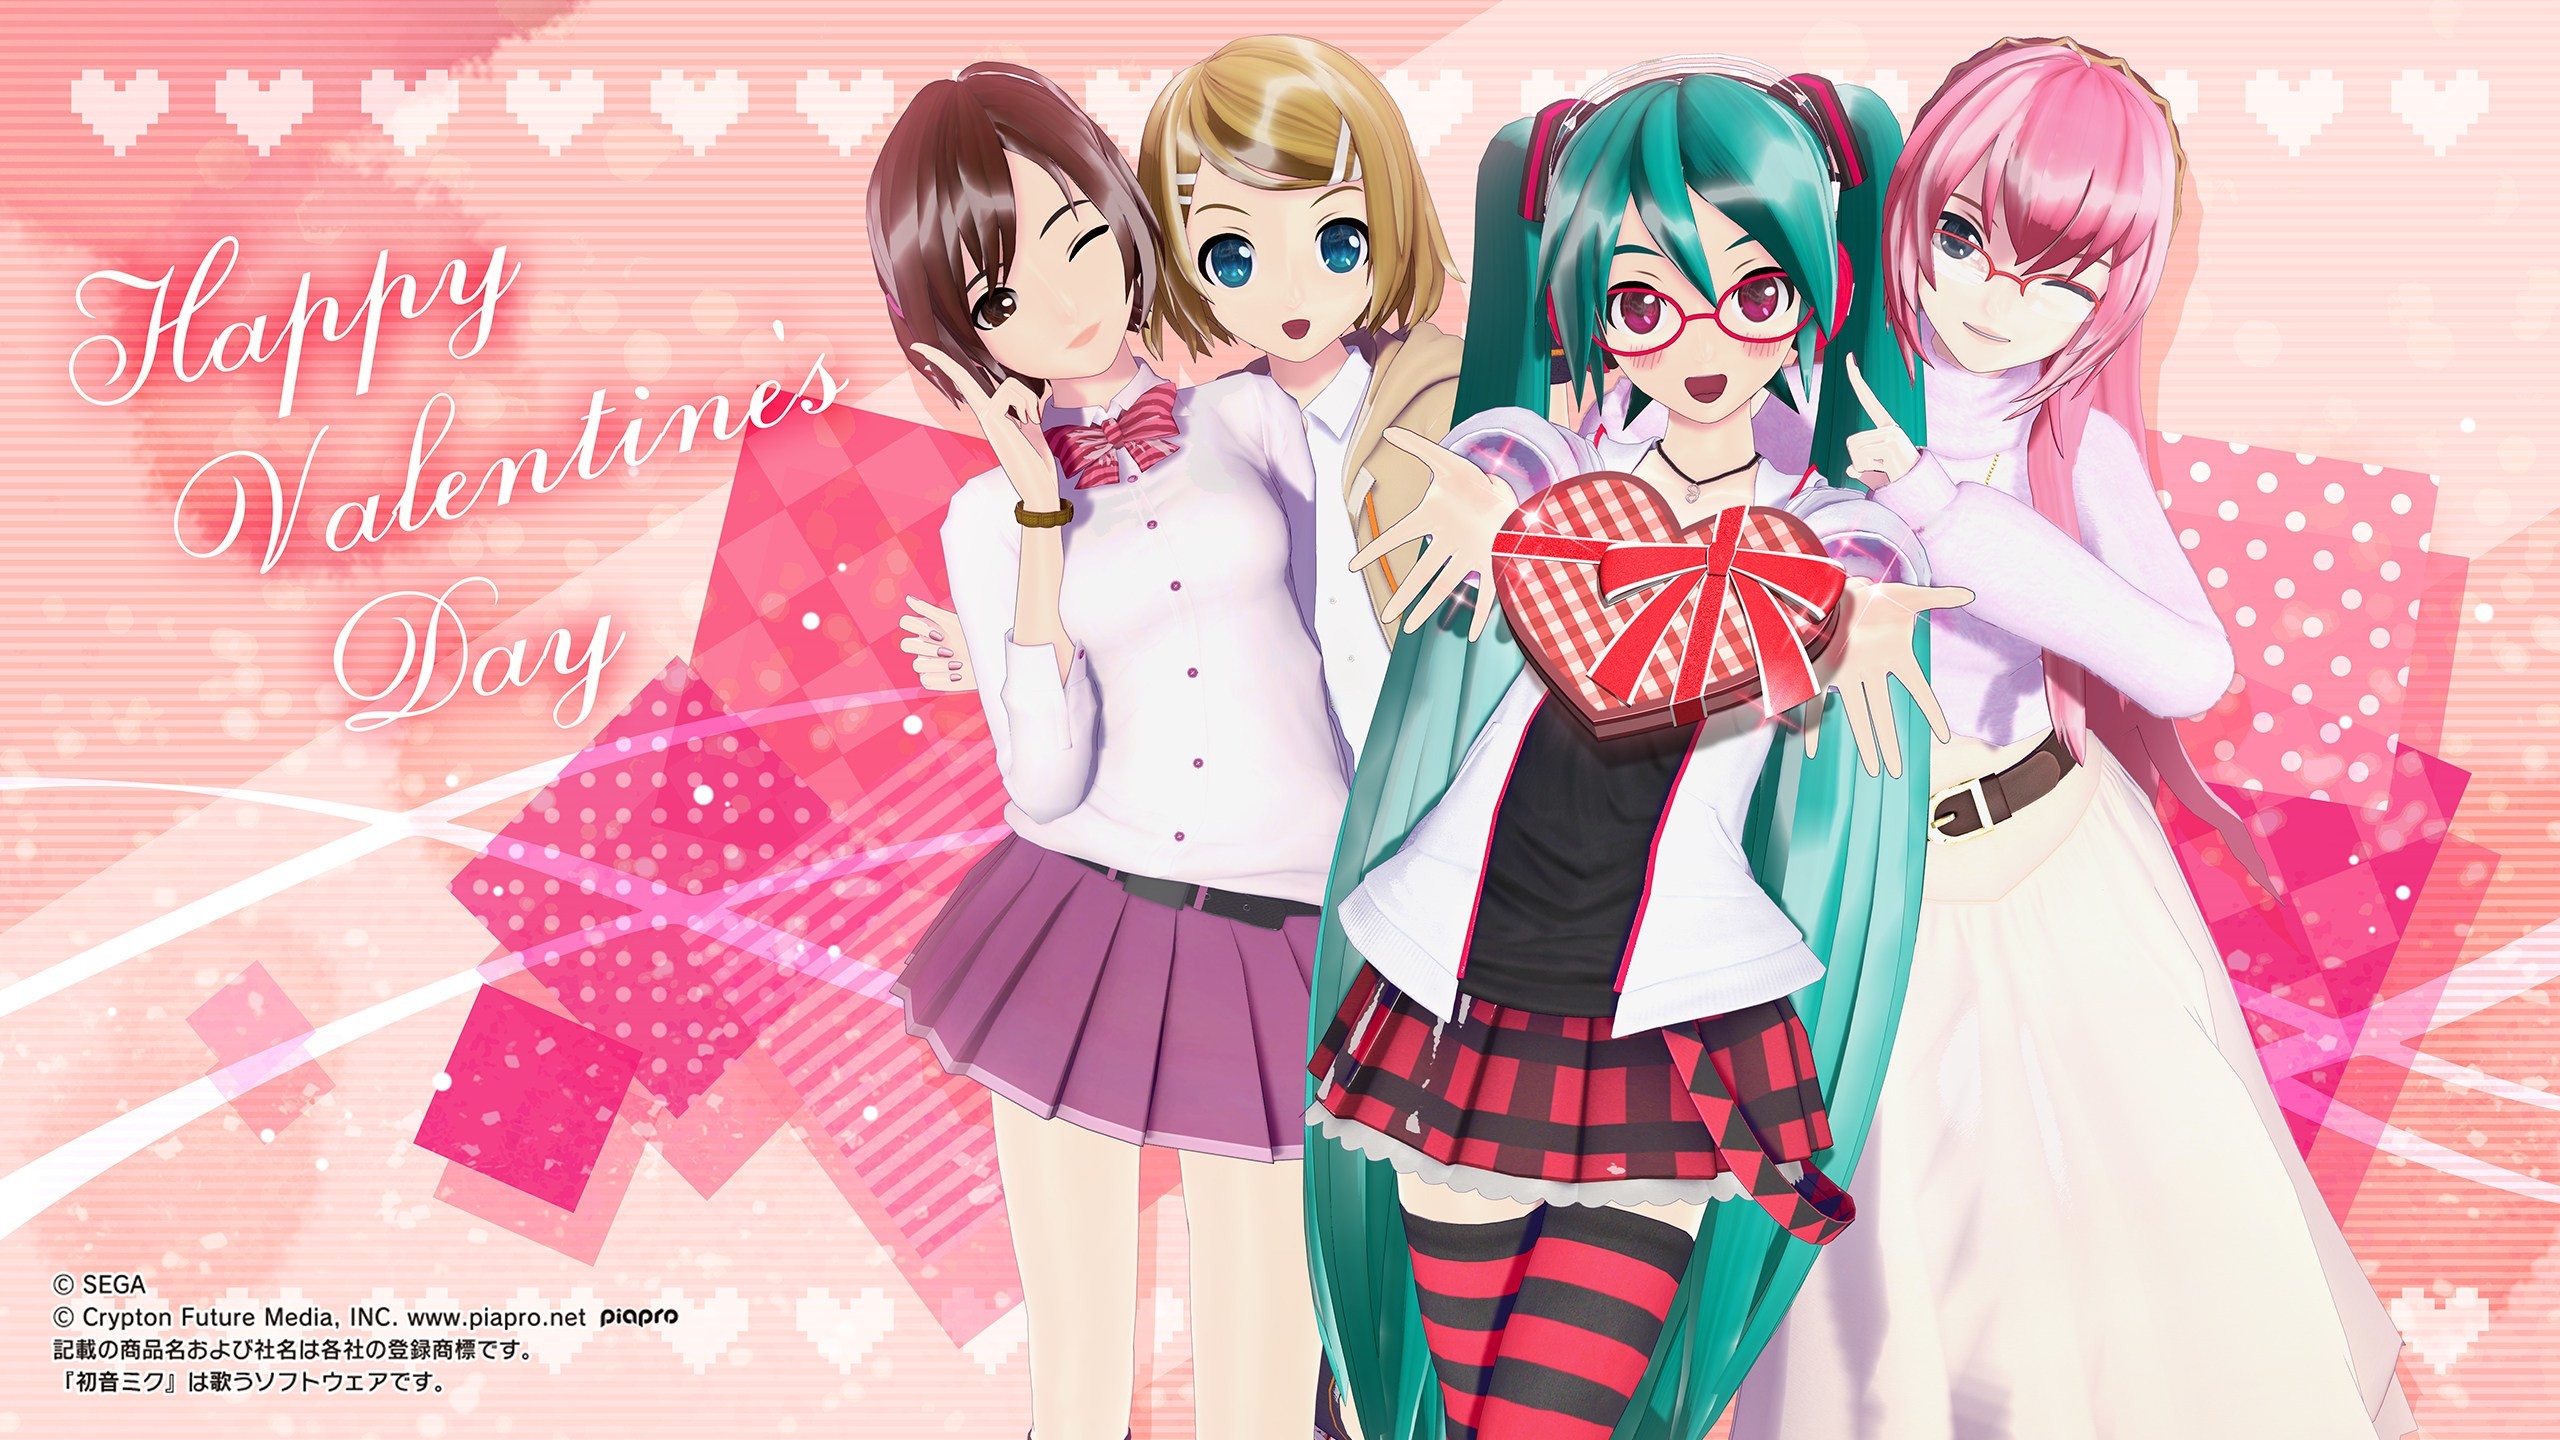 Project DIVA Team Celebrates Valentines Day With Project DIVA X Video and Wallpaper